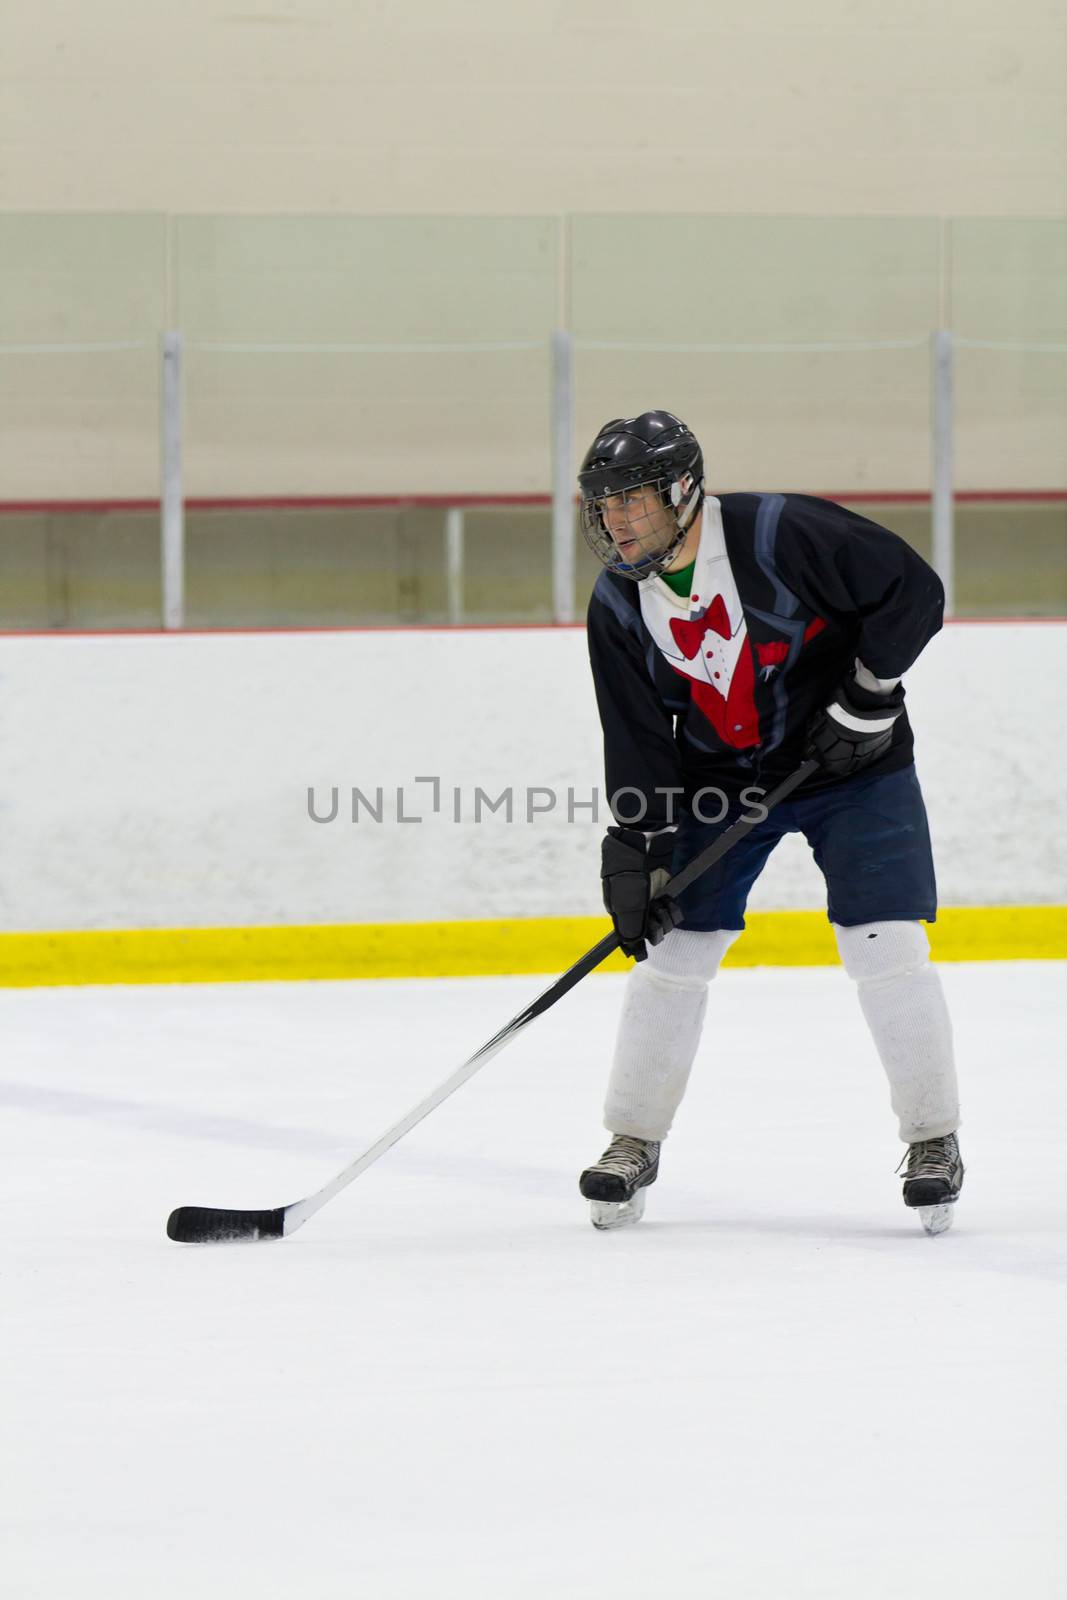 Hockey player ready for the drop of the puck by bigjohn36